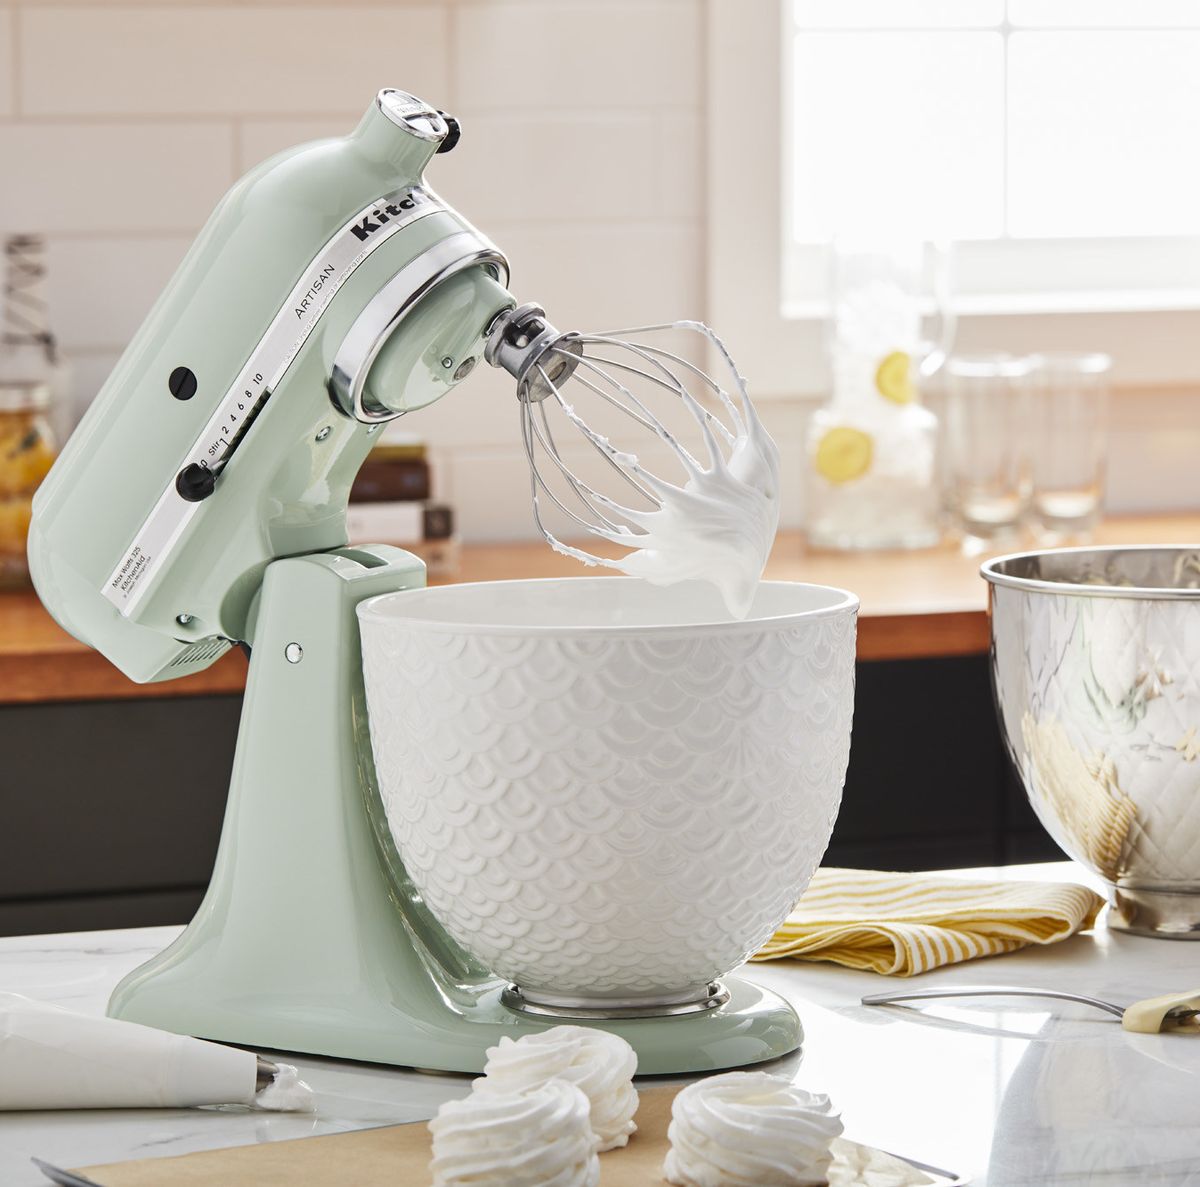 Mixer, Small appliance, Kitchen appliance, Whisk, Blender, Home appliance, Room, Food processor, Food, Juicer, 